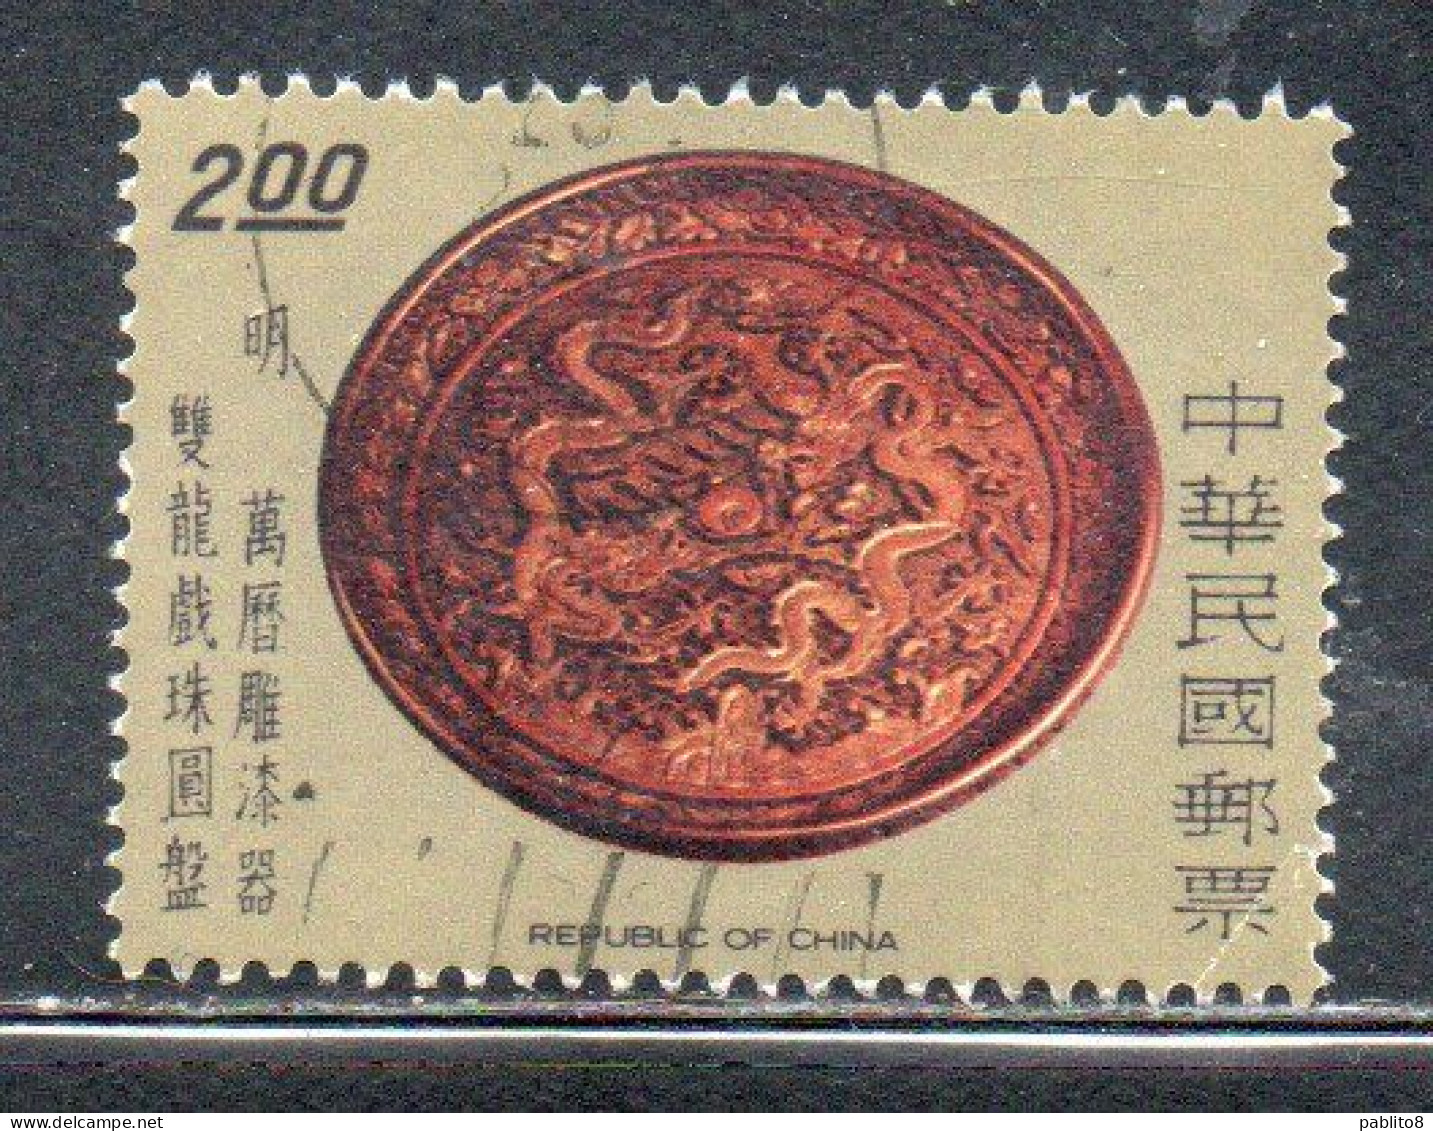 CHINA REPUBLIC CINA TAIWAN FORMOSA 1977 ANCIENT CARVED LACQUER WARE PLATE WAN-LI 2$ USED USATO OBLITERE' - Gebruikt